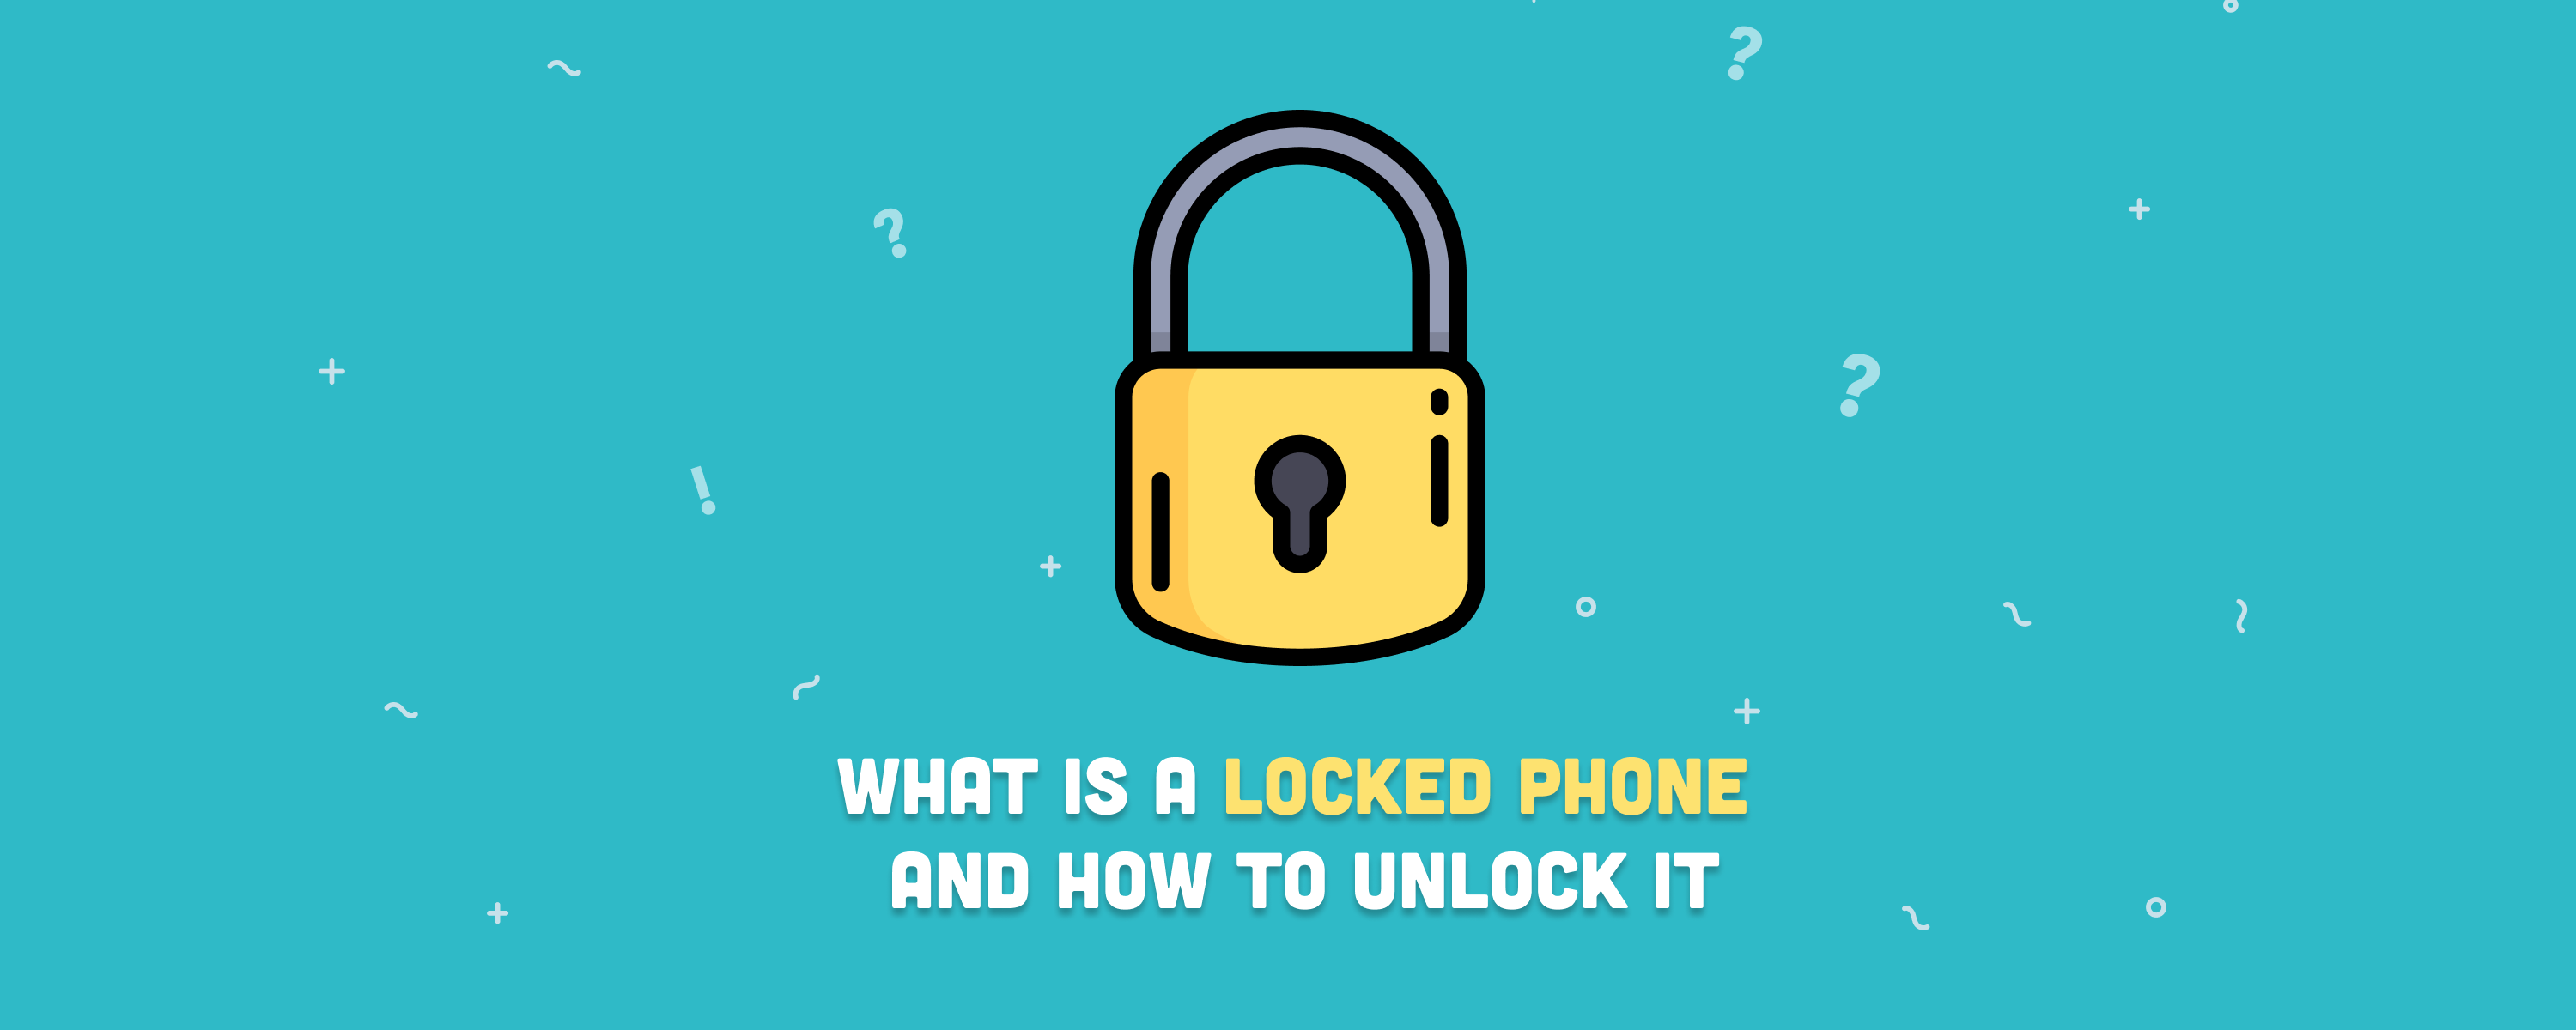 What Is a Locked Phone and How to Unlock It